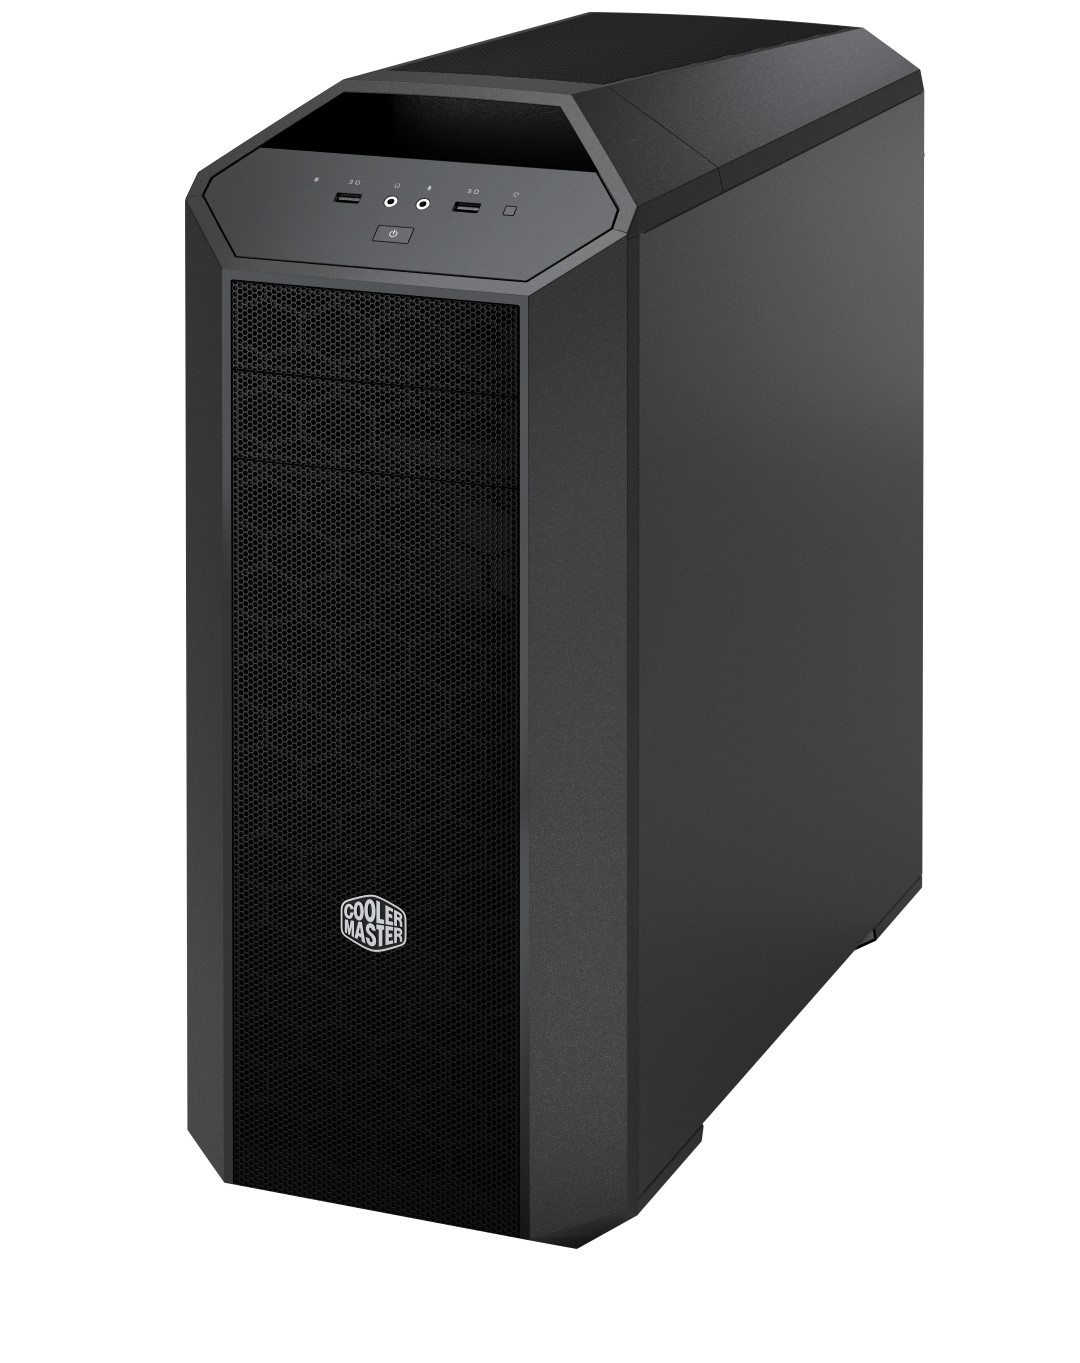 Cooler Master MasterCase 5 available on this 20th August 23